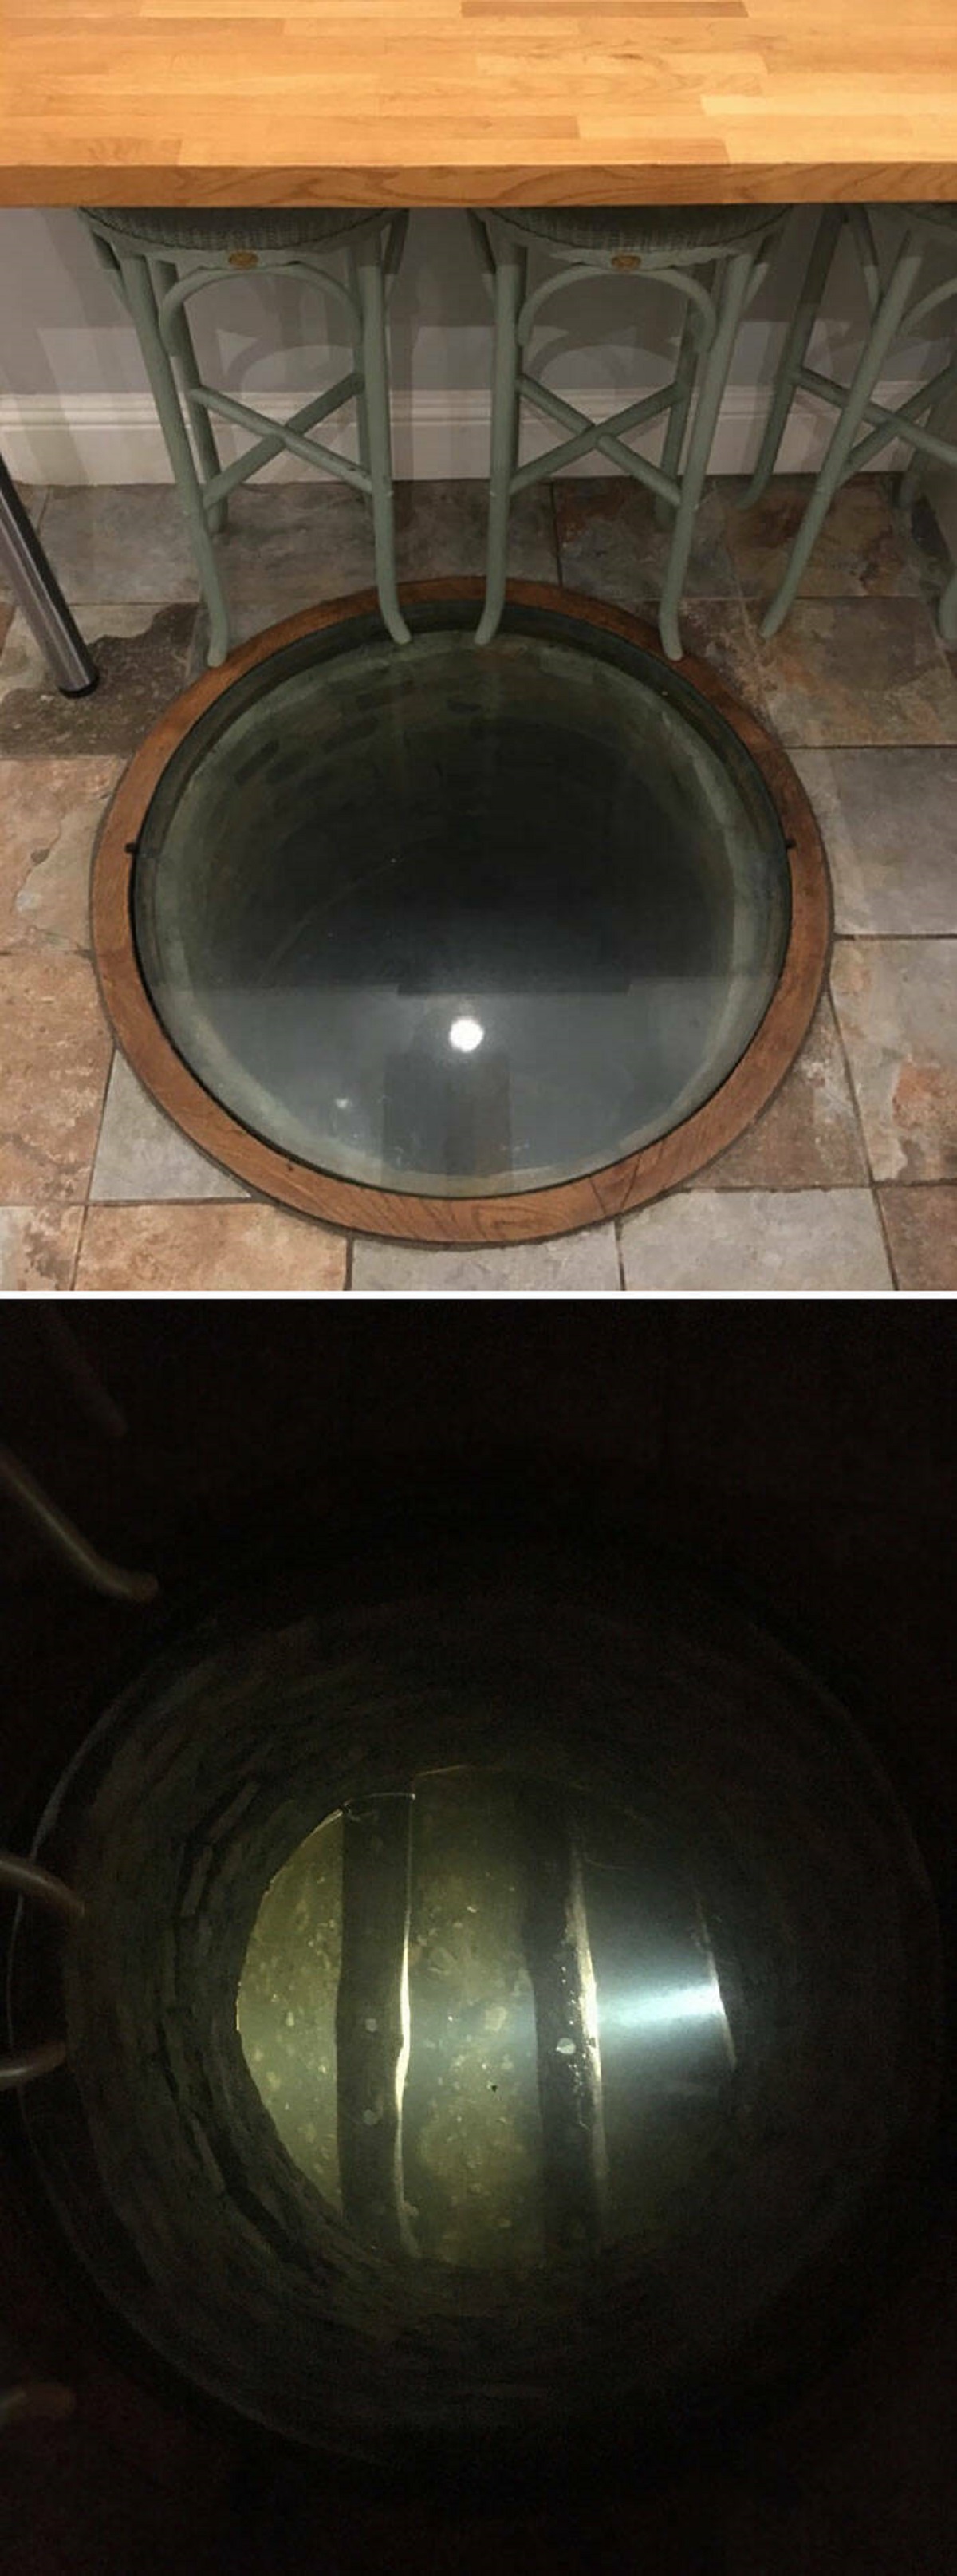 "The House I'm Staying In Has Kept Its Original Well As A Feature"